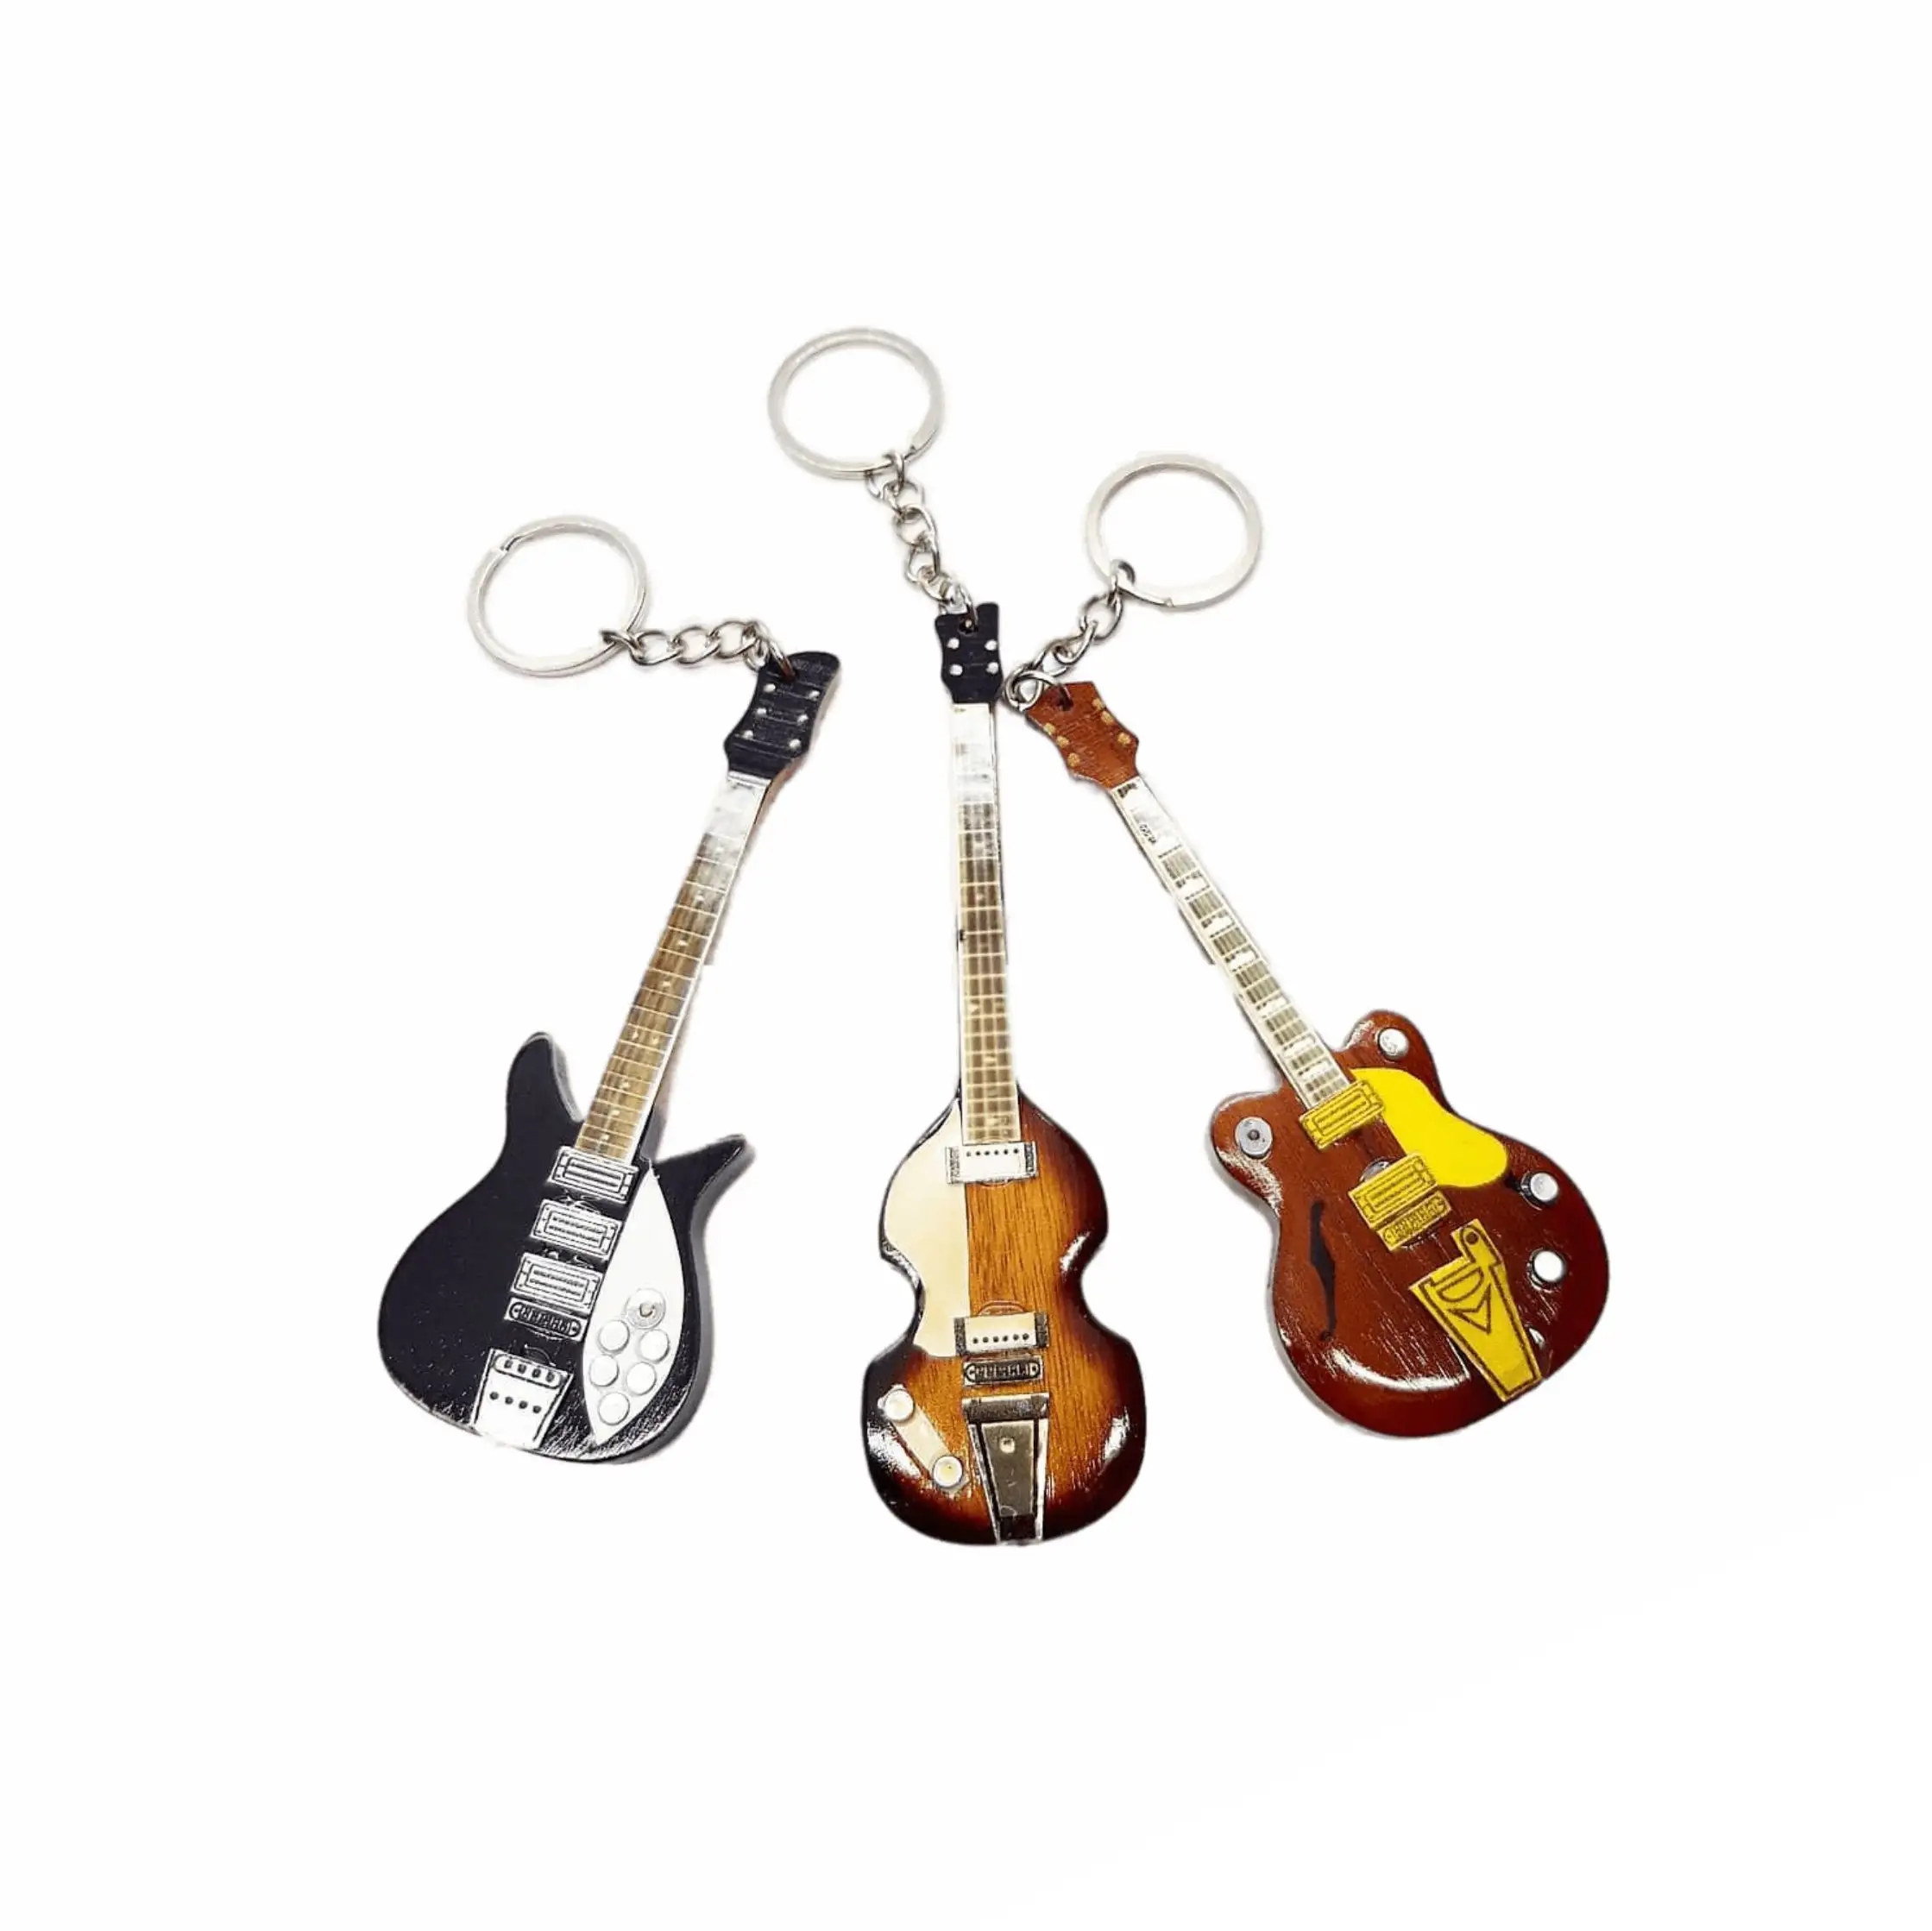 miniature guitar keychain decoration for keychain and keyring souvenir accessories